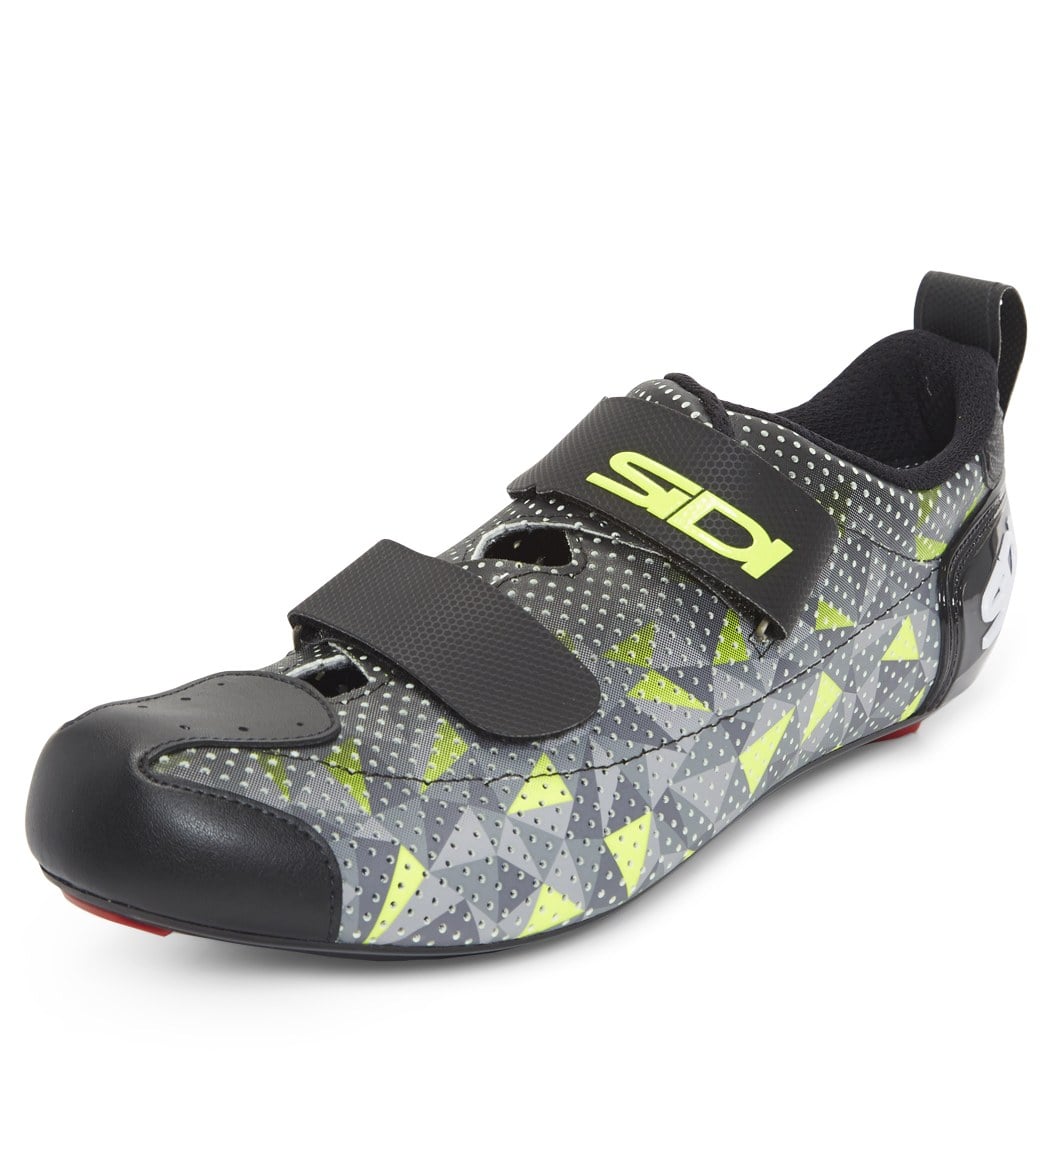 5 cycling shoes